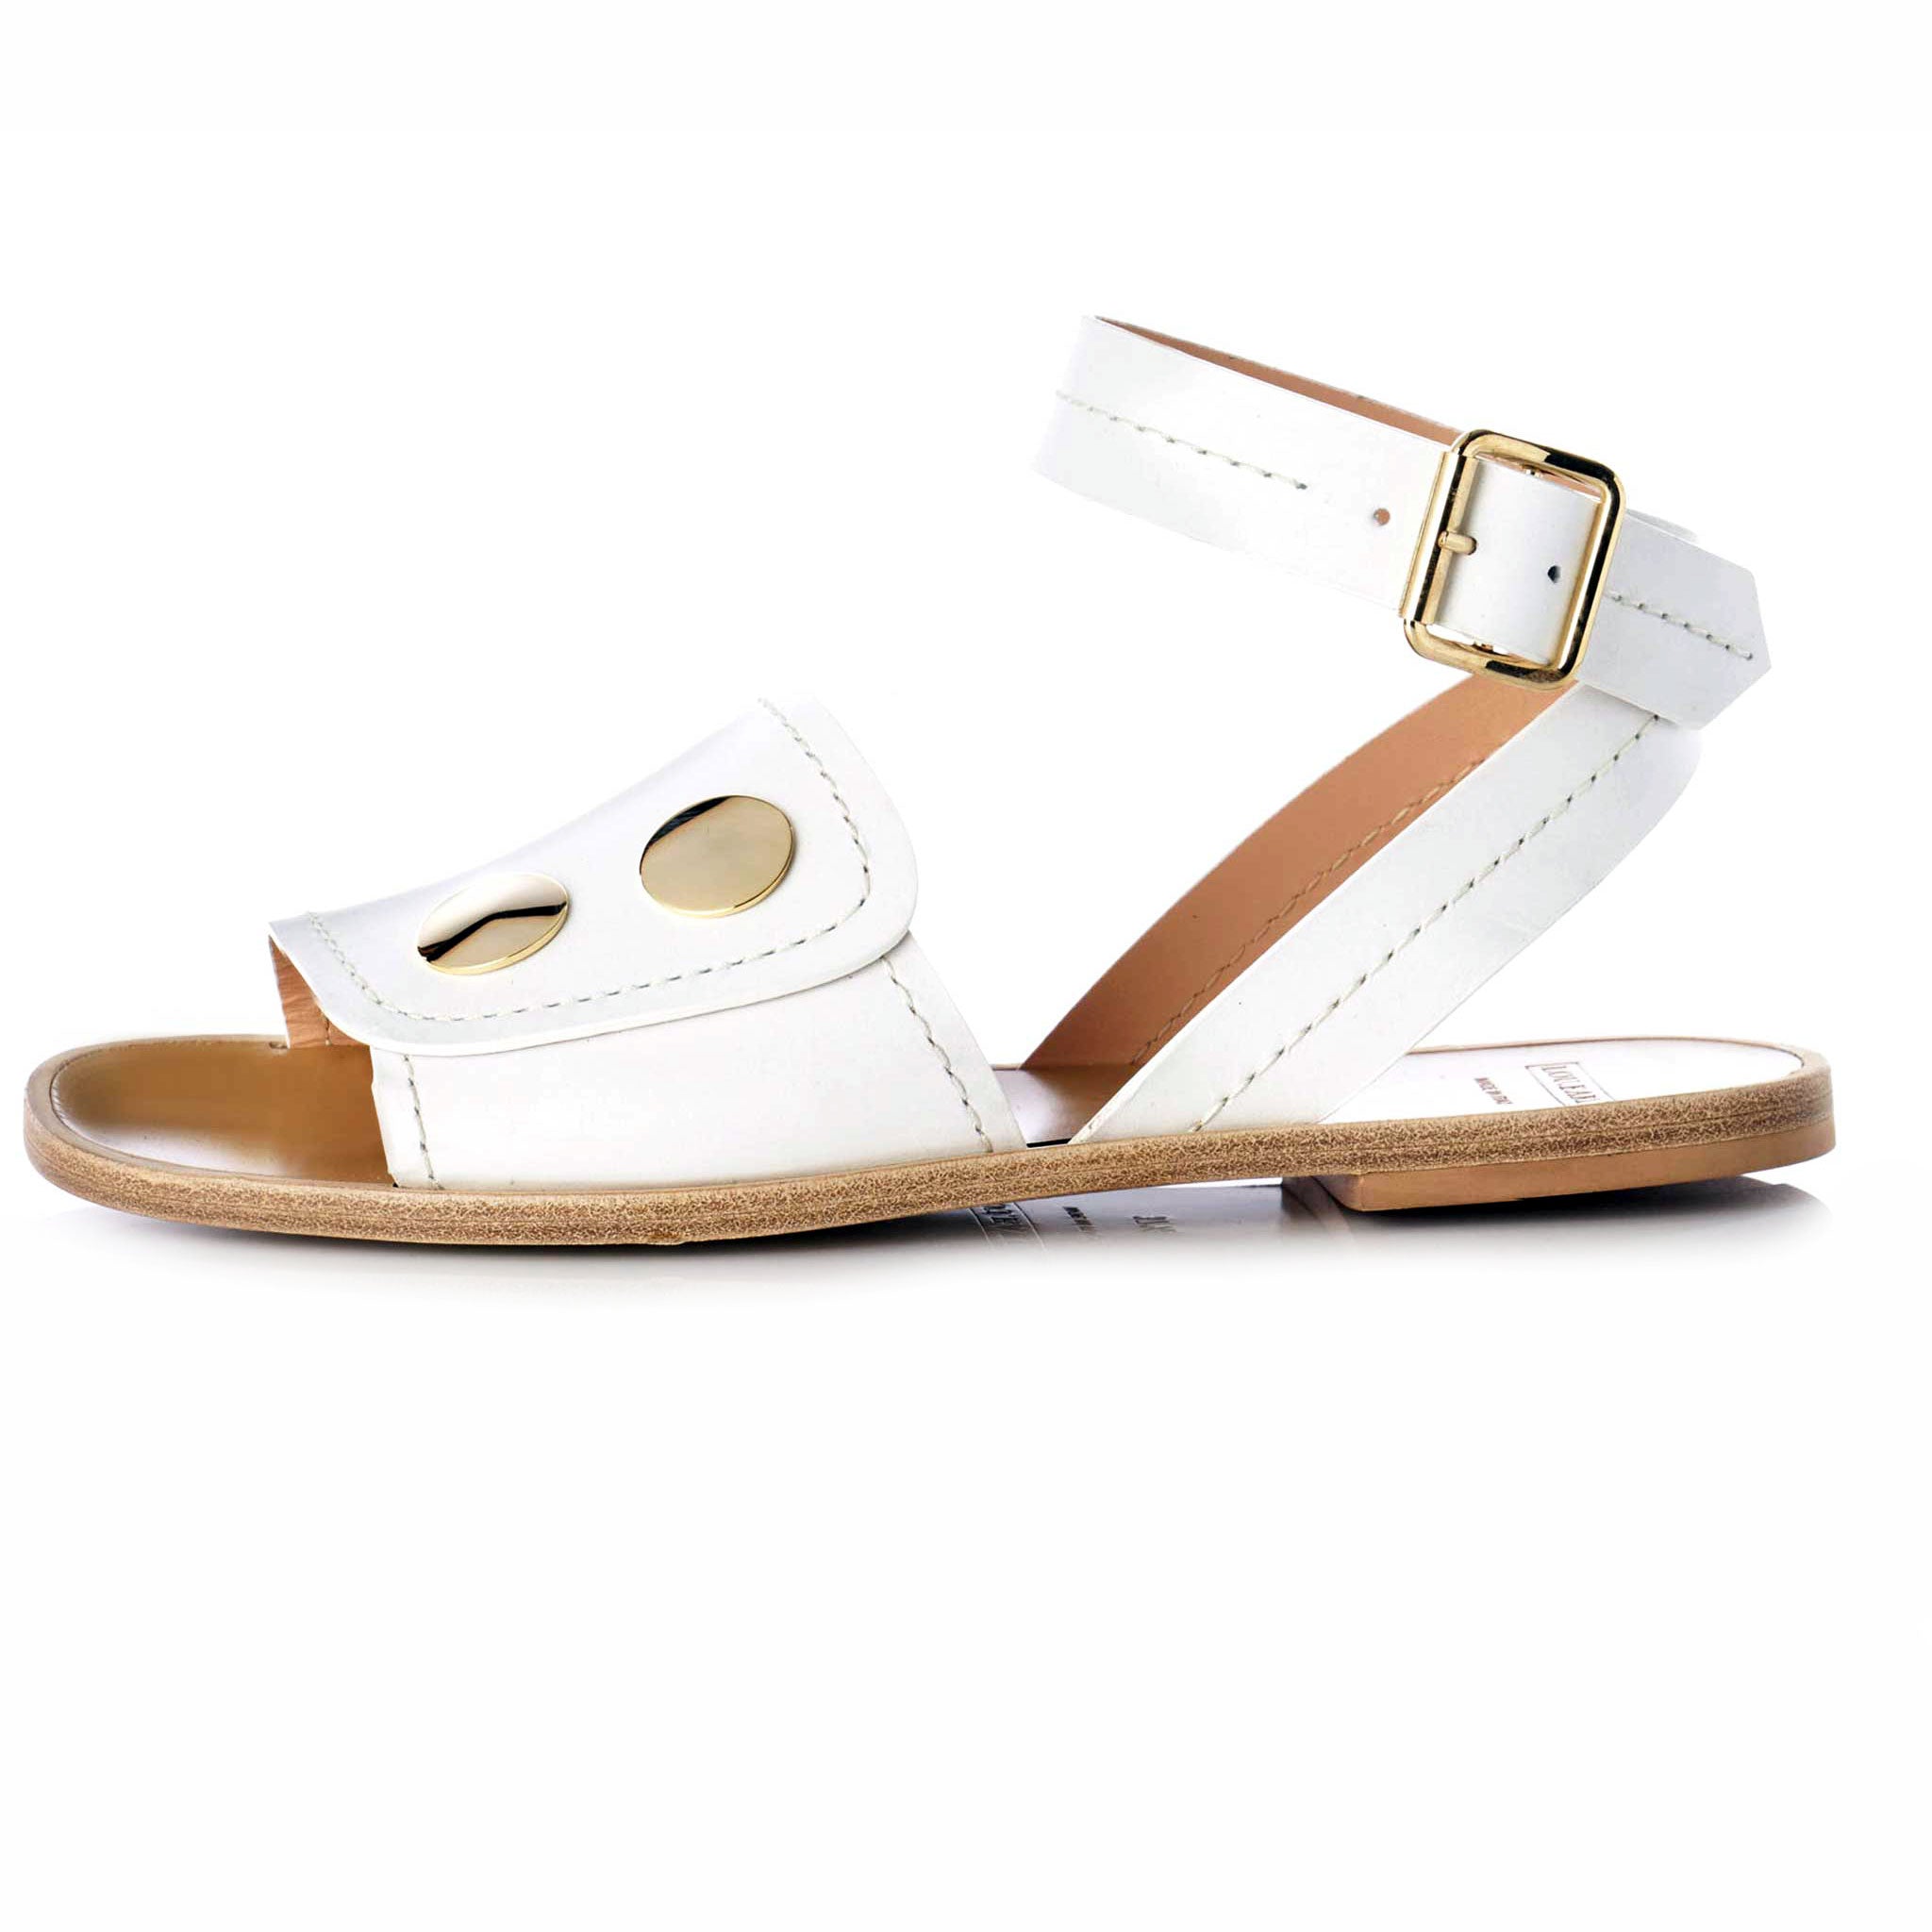 Euro fashion luxury leather womens sandal with a tan brown leather sole, open toe white leather upper with oversized stud detail, ankle strap and buckle detail 